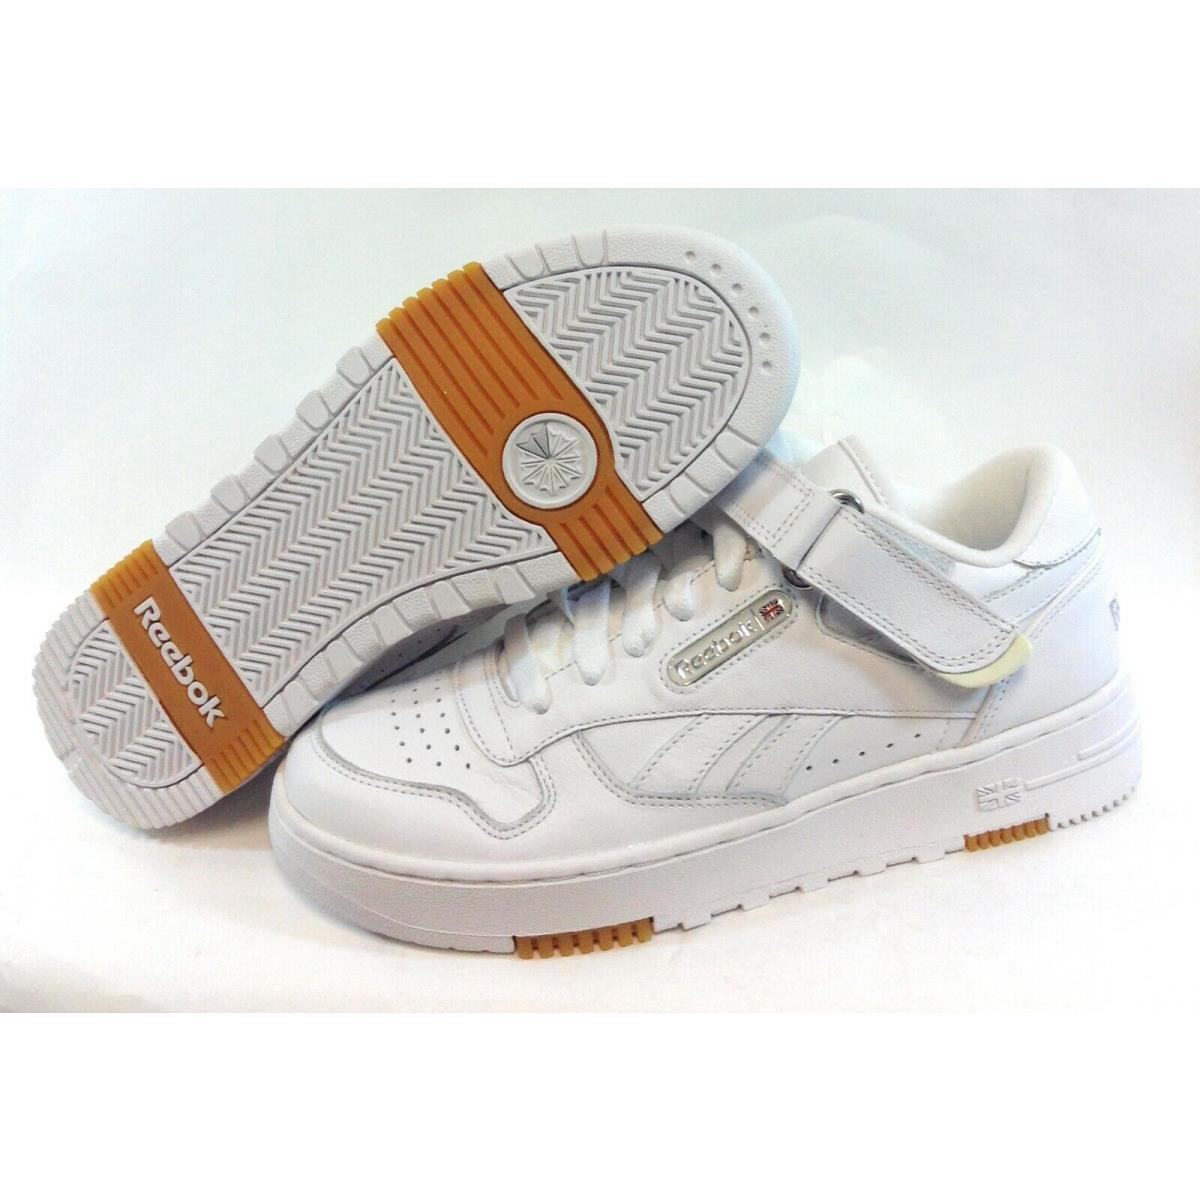 Mens Reebok Classic Leather BB Low Strap White Vintage Deadstock Sneakers Shoes